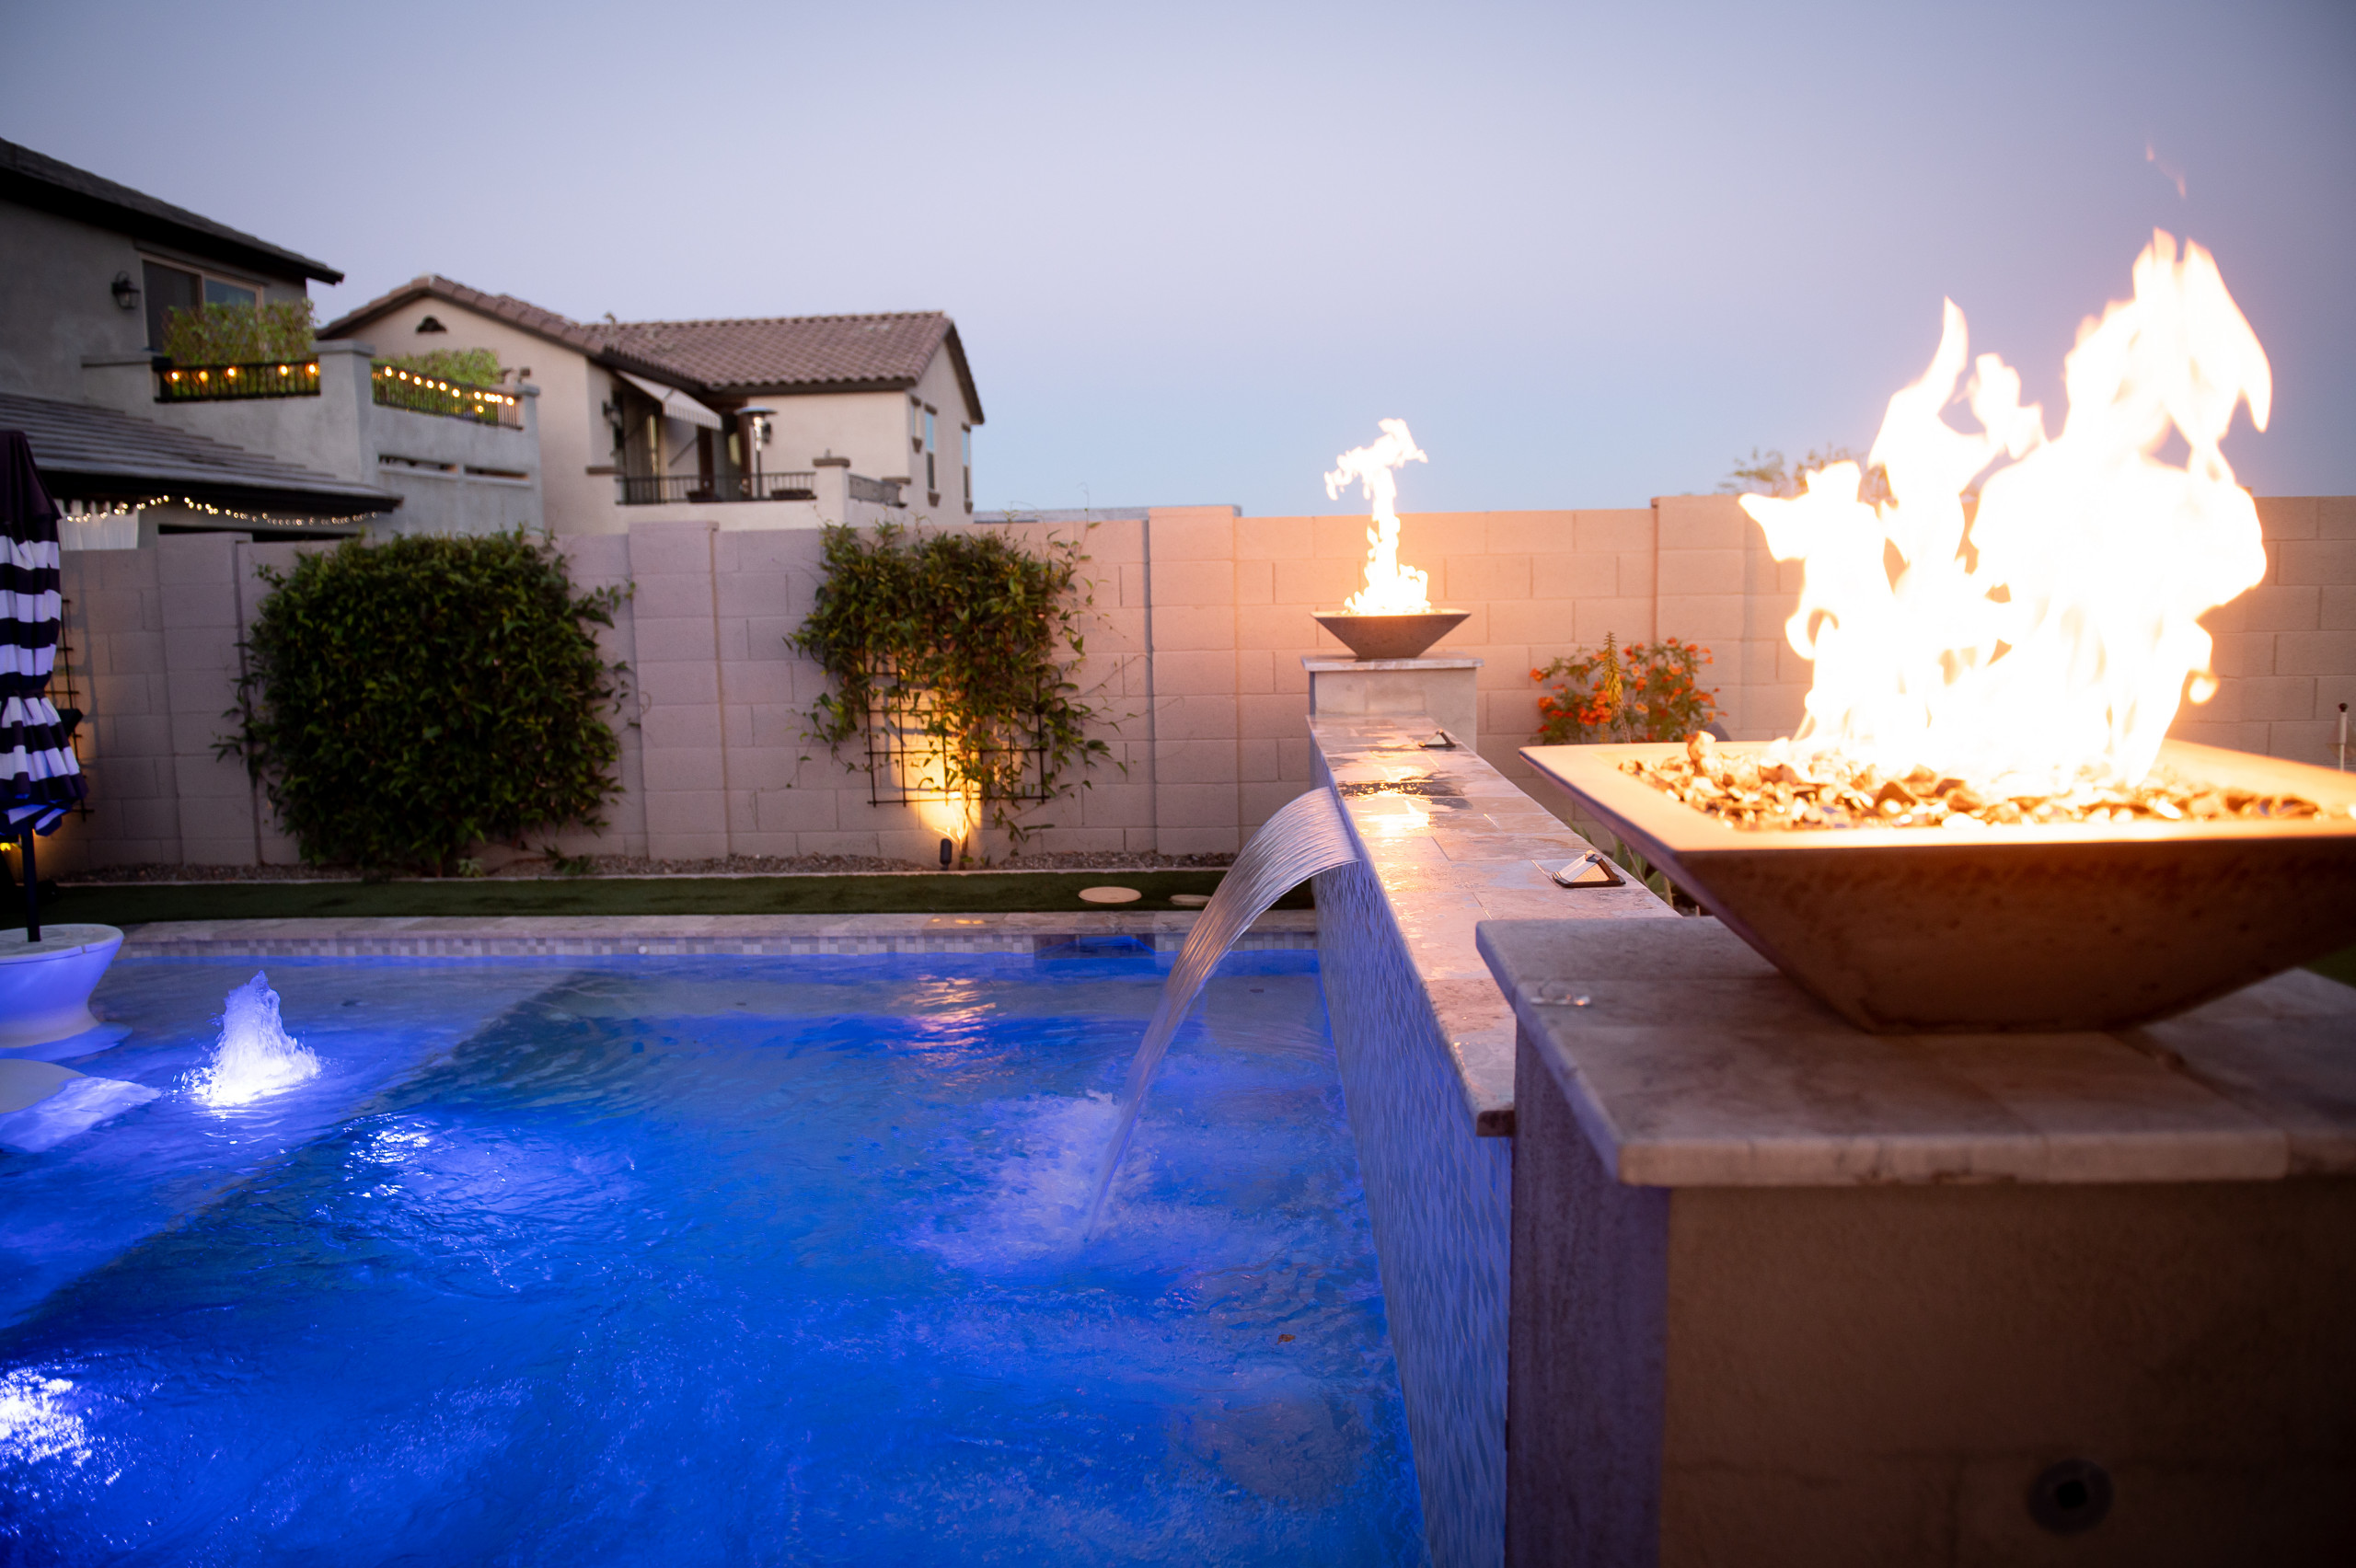 Fire pots/water feature